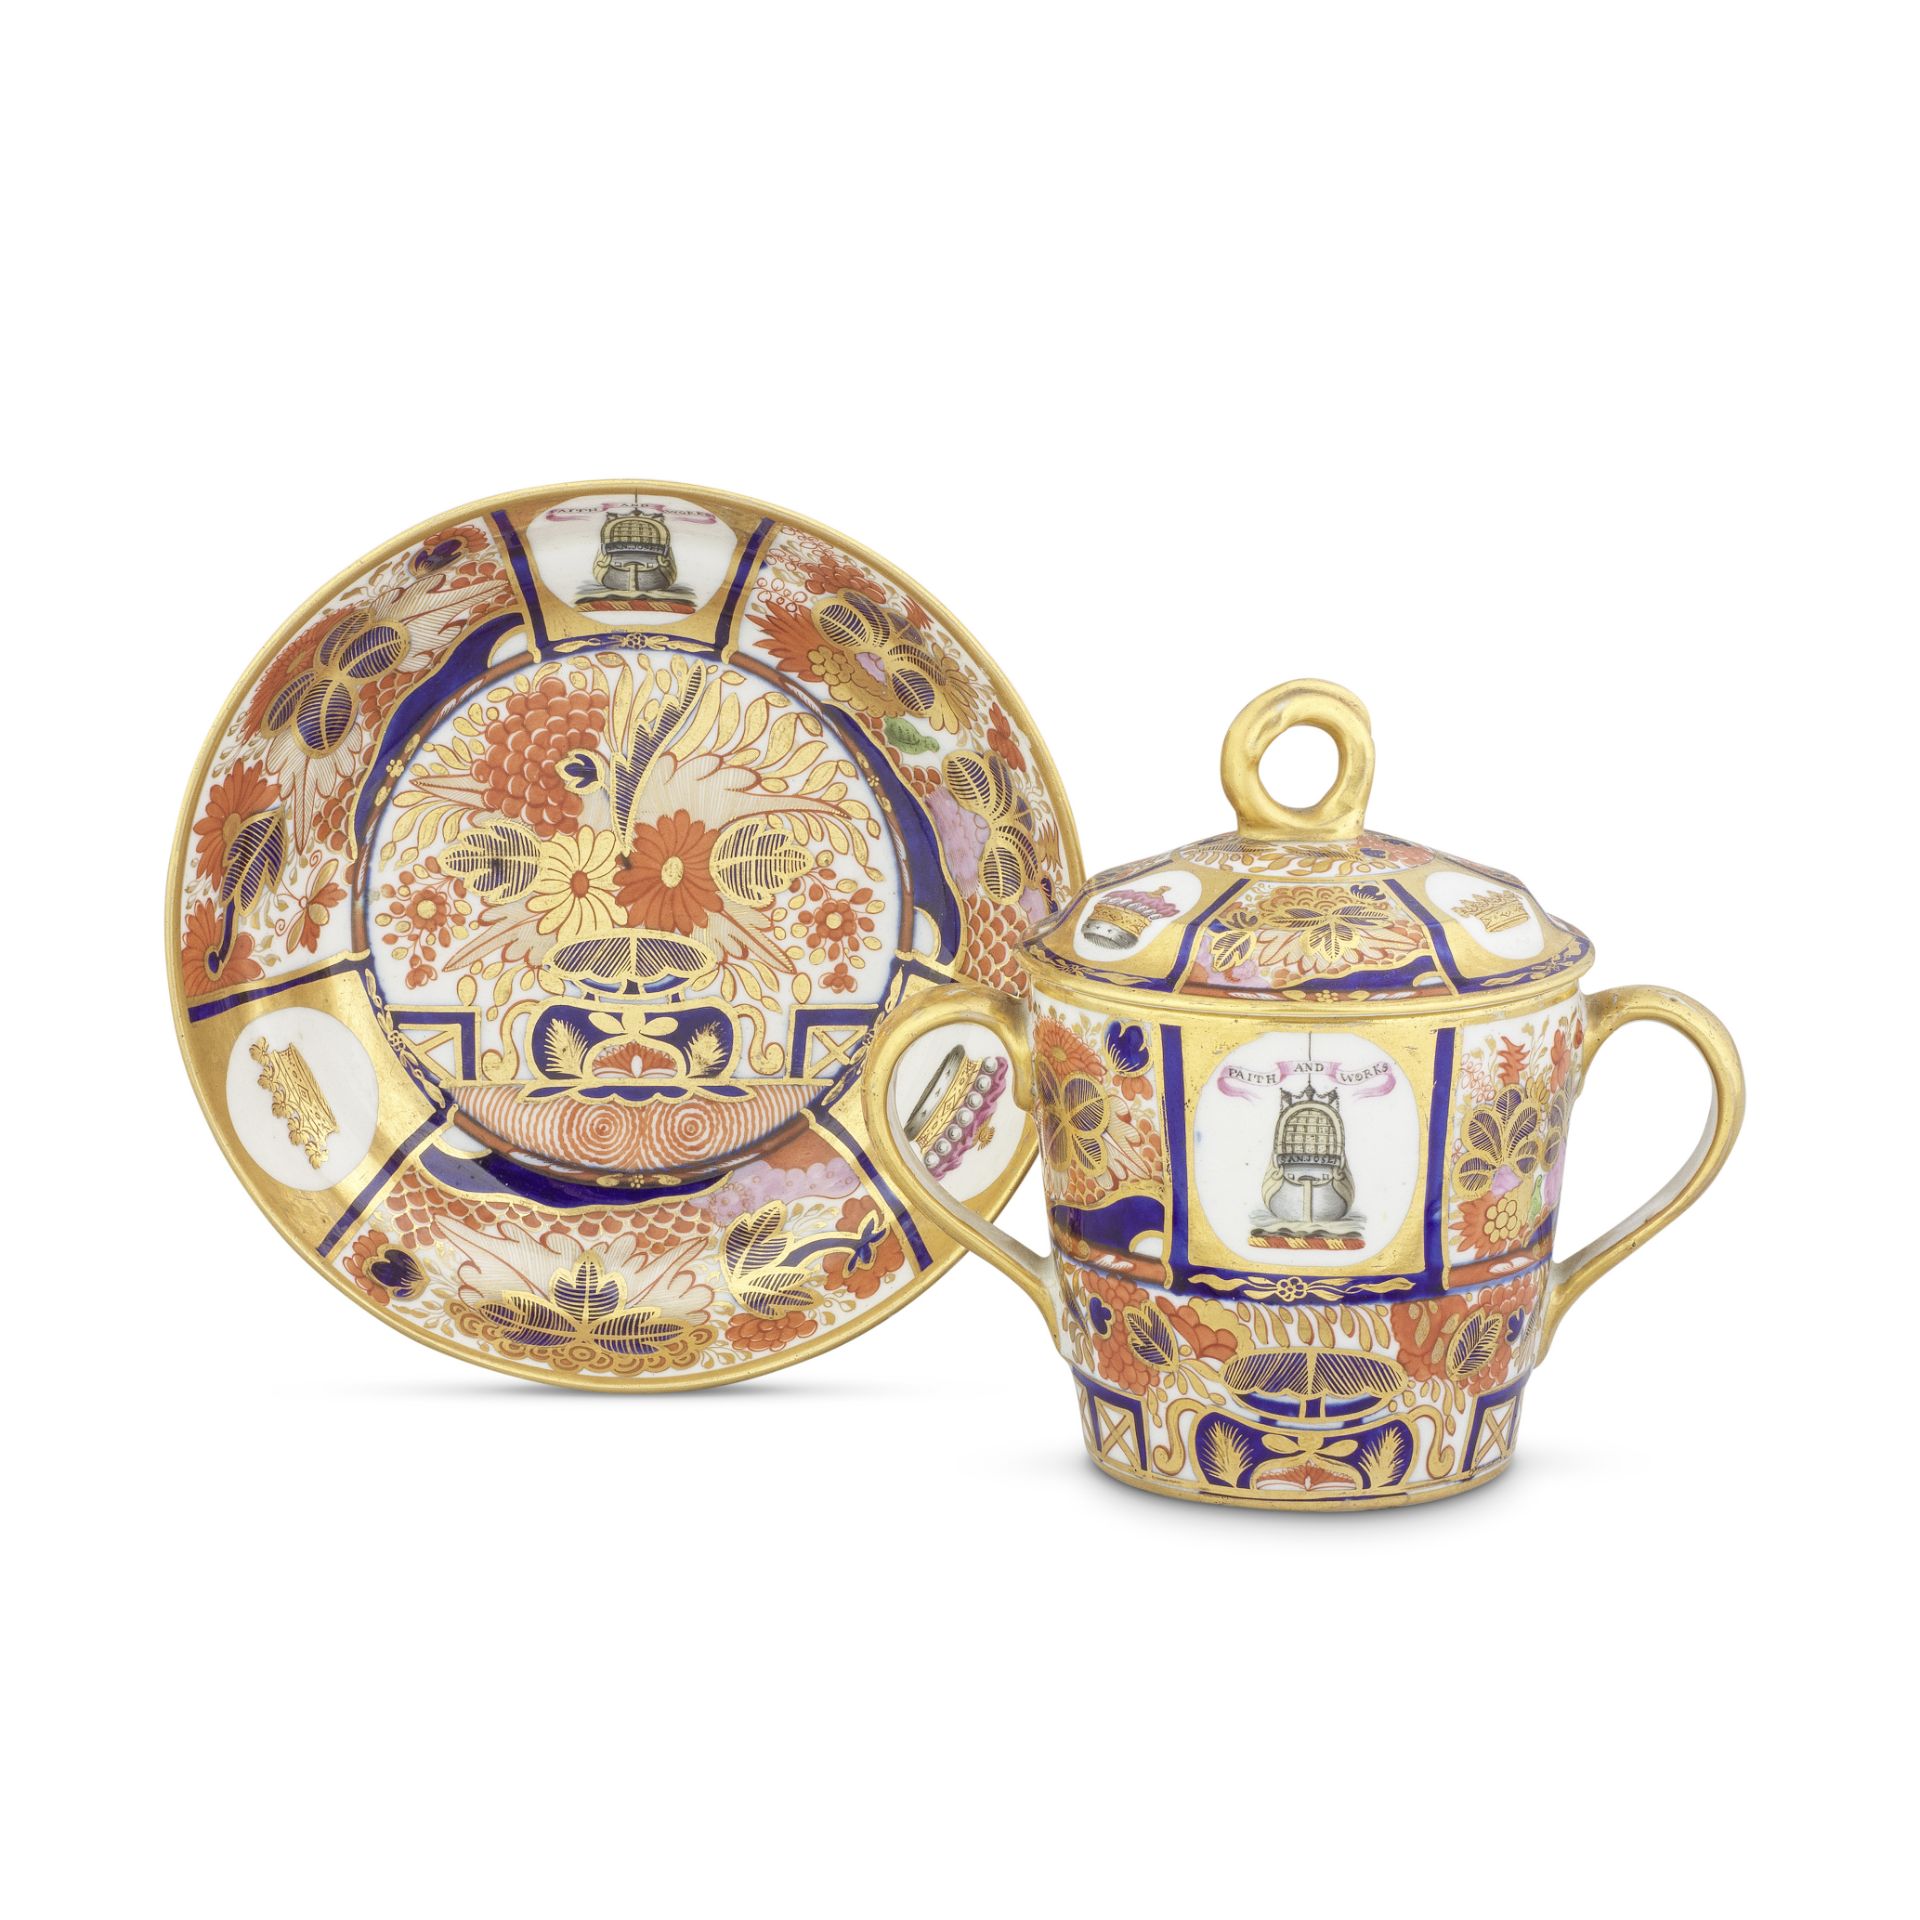 A Chamberlain Worcester chocolate cup, cover and stand from the 'Horatia Service', circa 1802-03